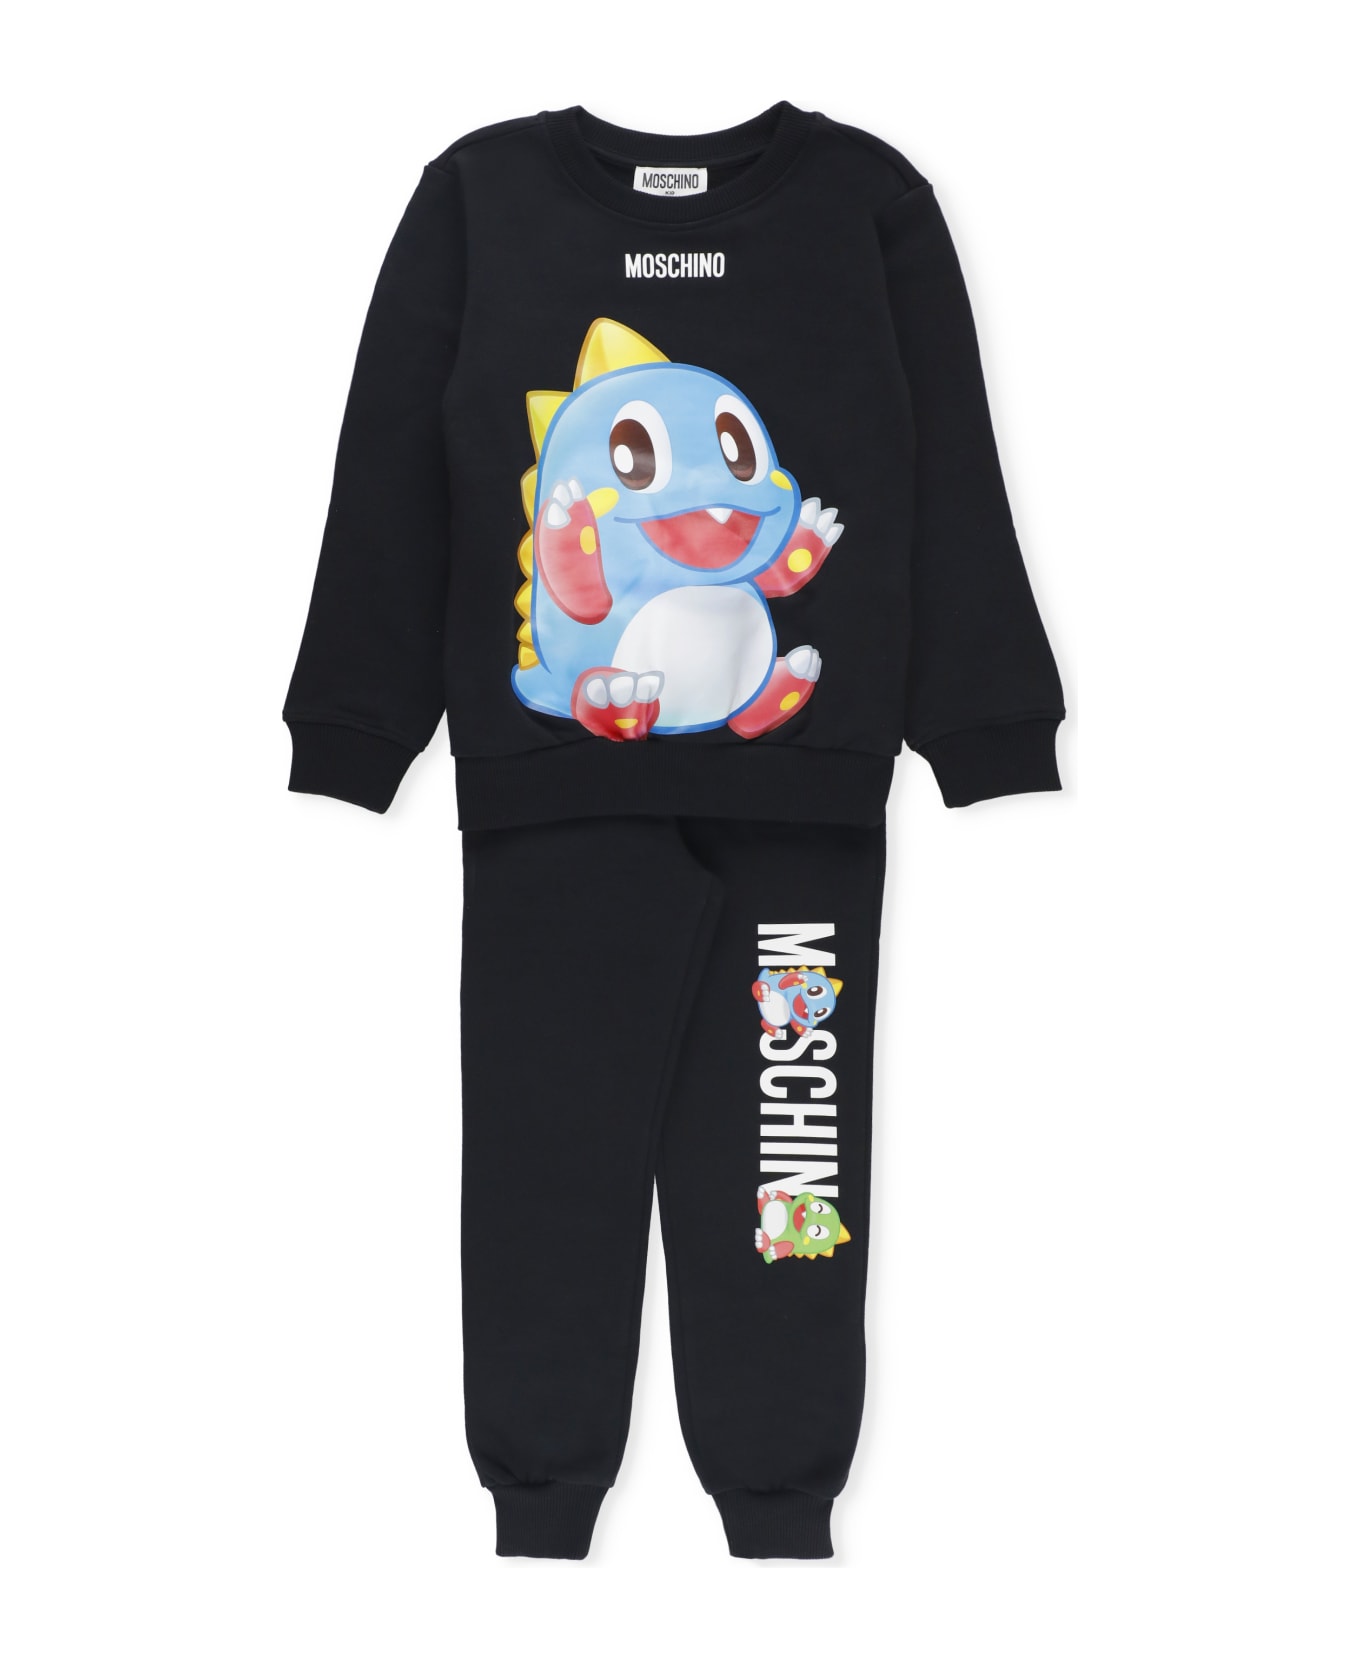 Moschino Chinese New Year Two Piece Suit - Black